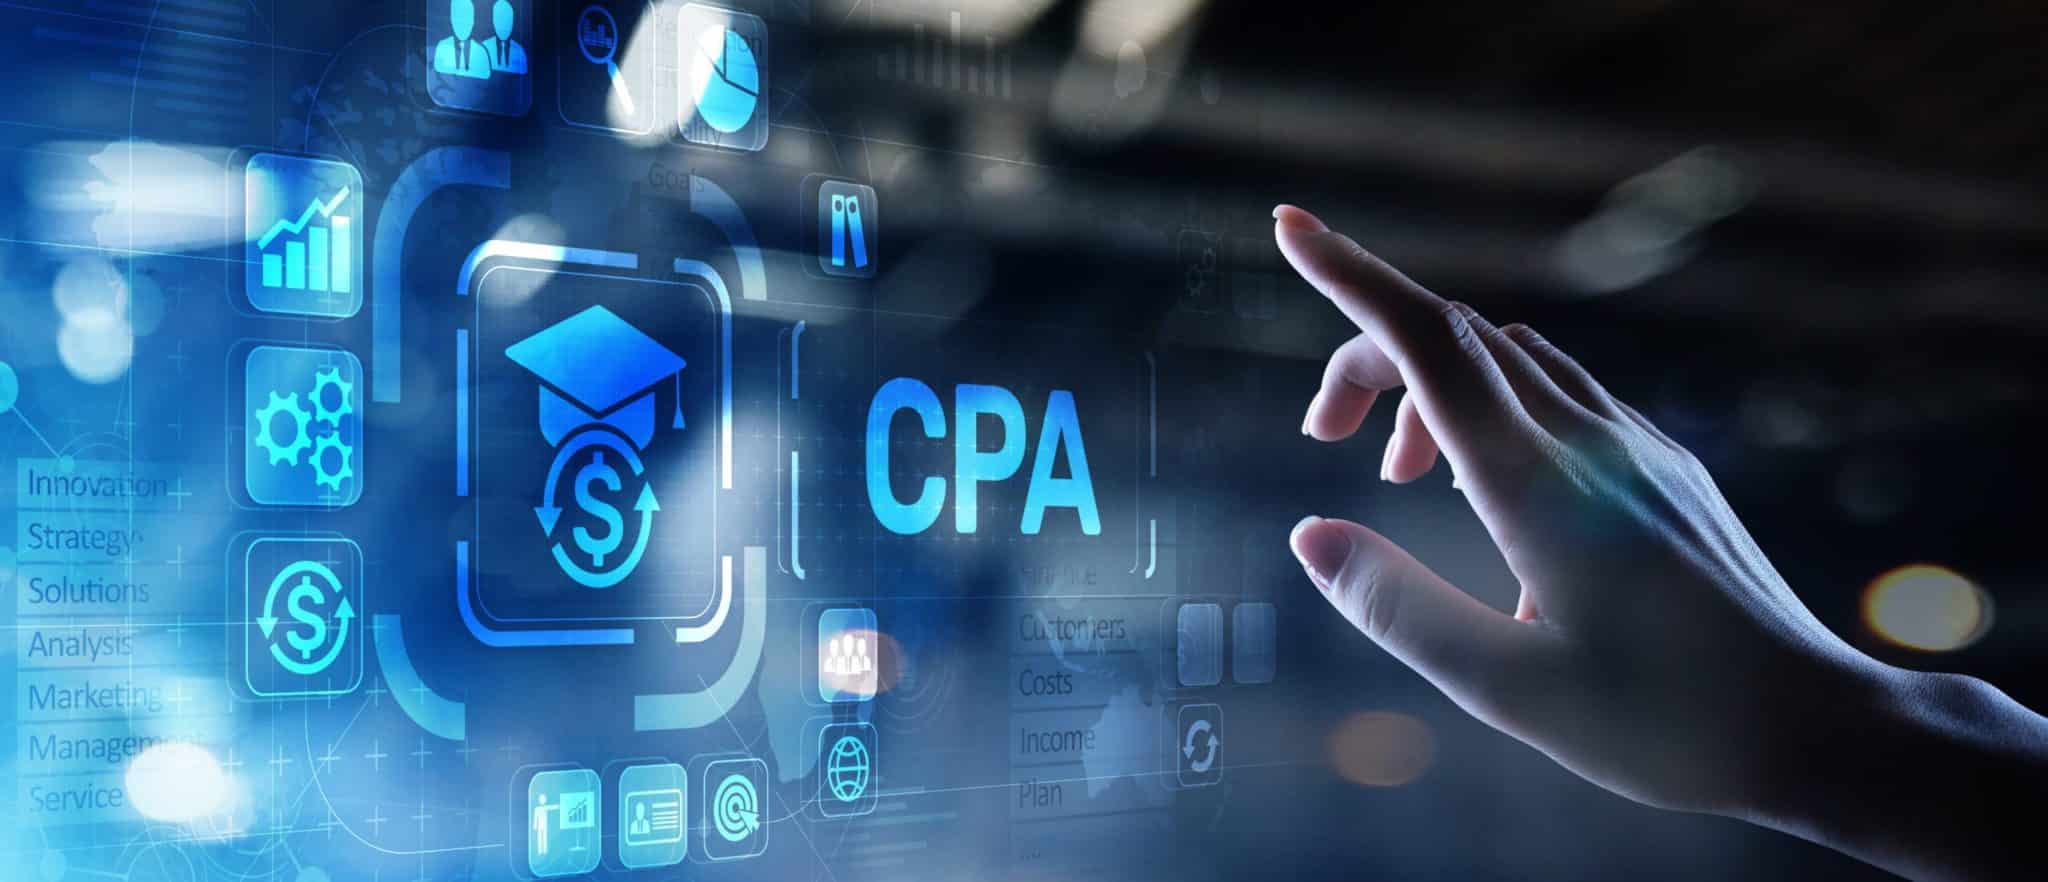 How to become a CPA - Certified Public Accountant